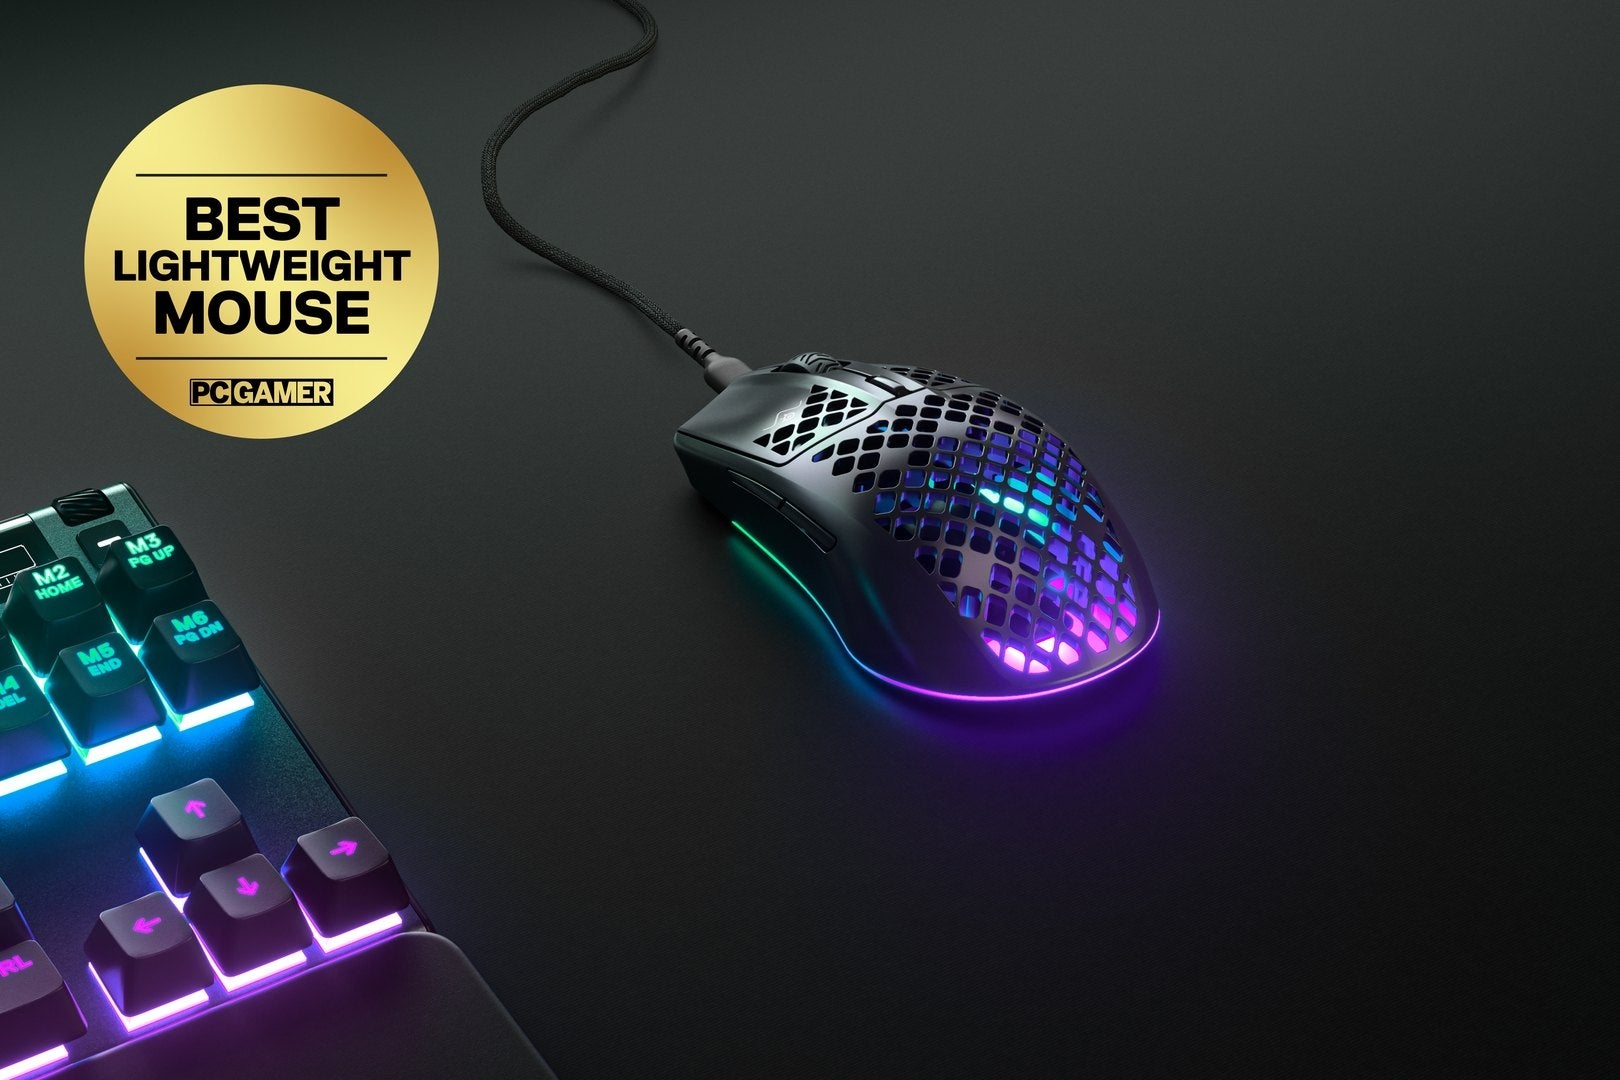 a photo of a beautiful RGB gaming peripheral, specifically an Aerox mouse